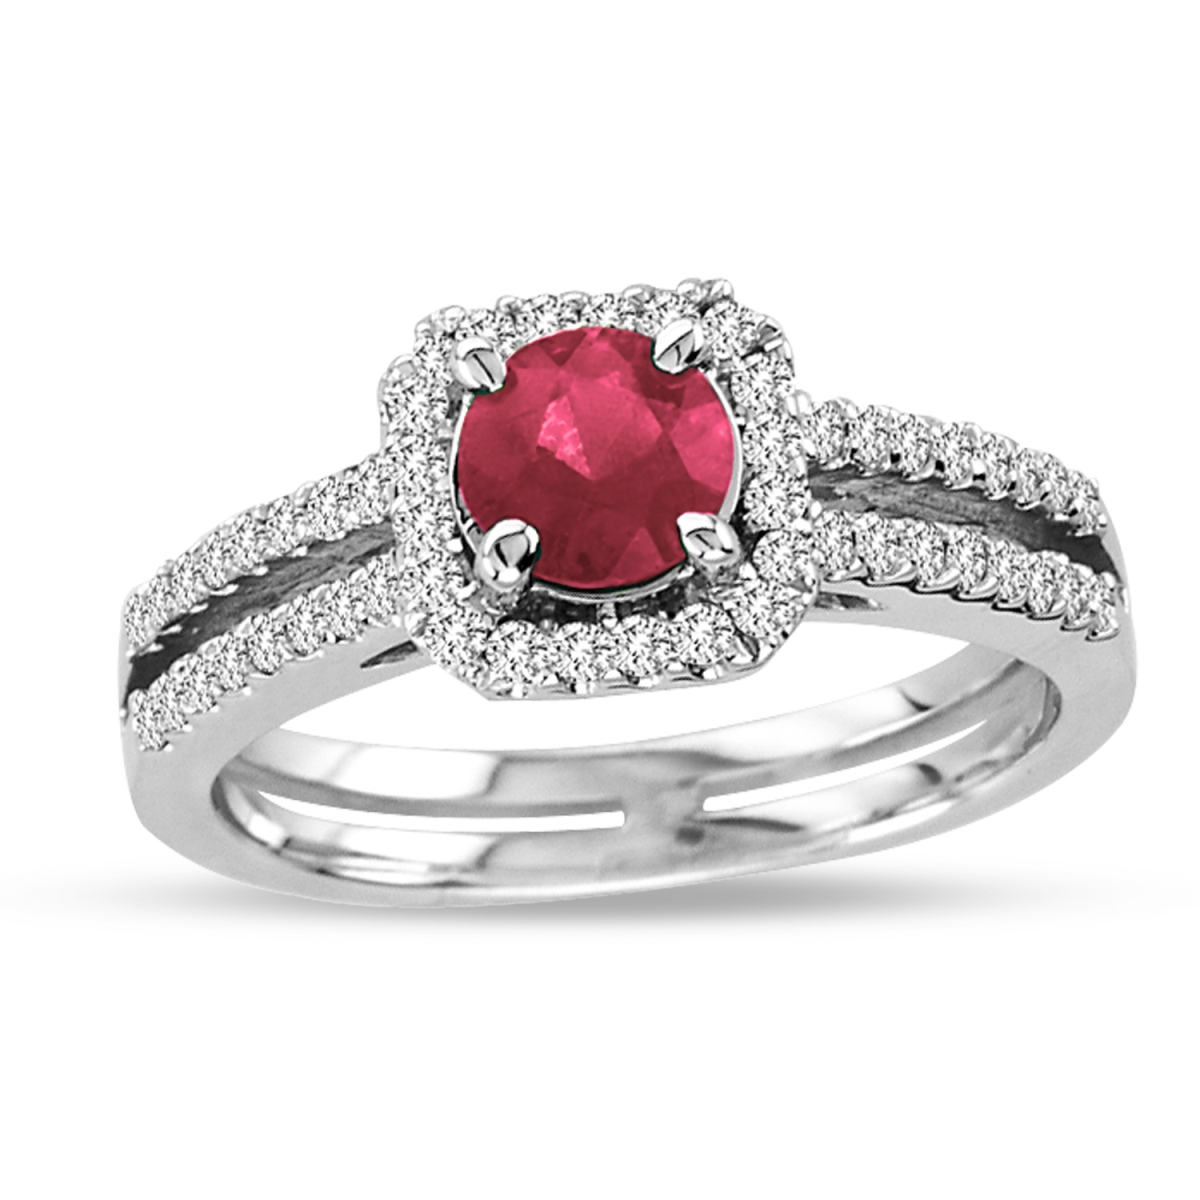 Picture of Louis Creations RL1140RD-4.5 14K Gold Ring with 0.75 CT Natural Heated Ruby & 0.40 CTTW of Round Diamonds Rings - Size 4.5